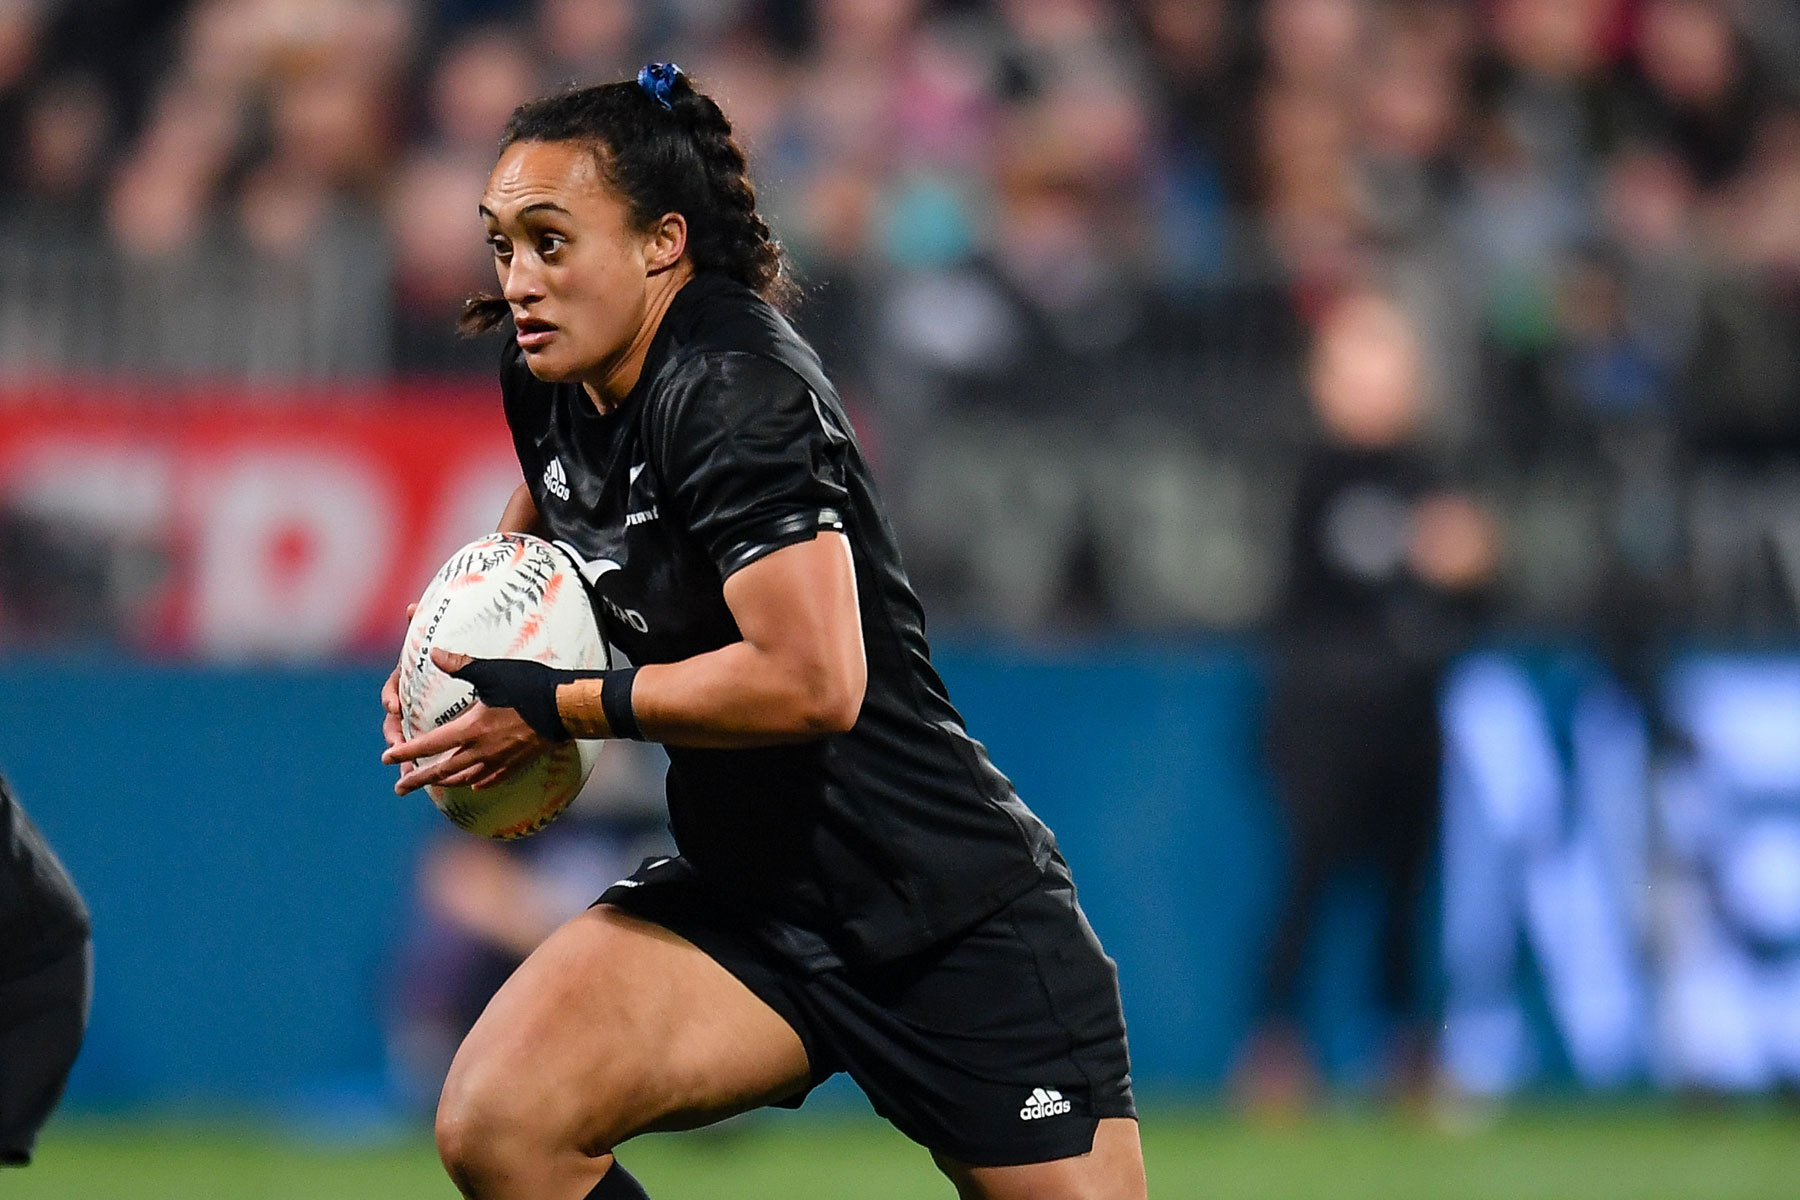 Womens Rugby World Cup Black Ferns v Wales, kickoff time, how to watch in NZ, live streaming, teams, odds - all you need to know